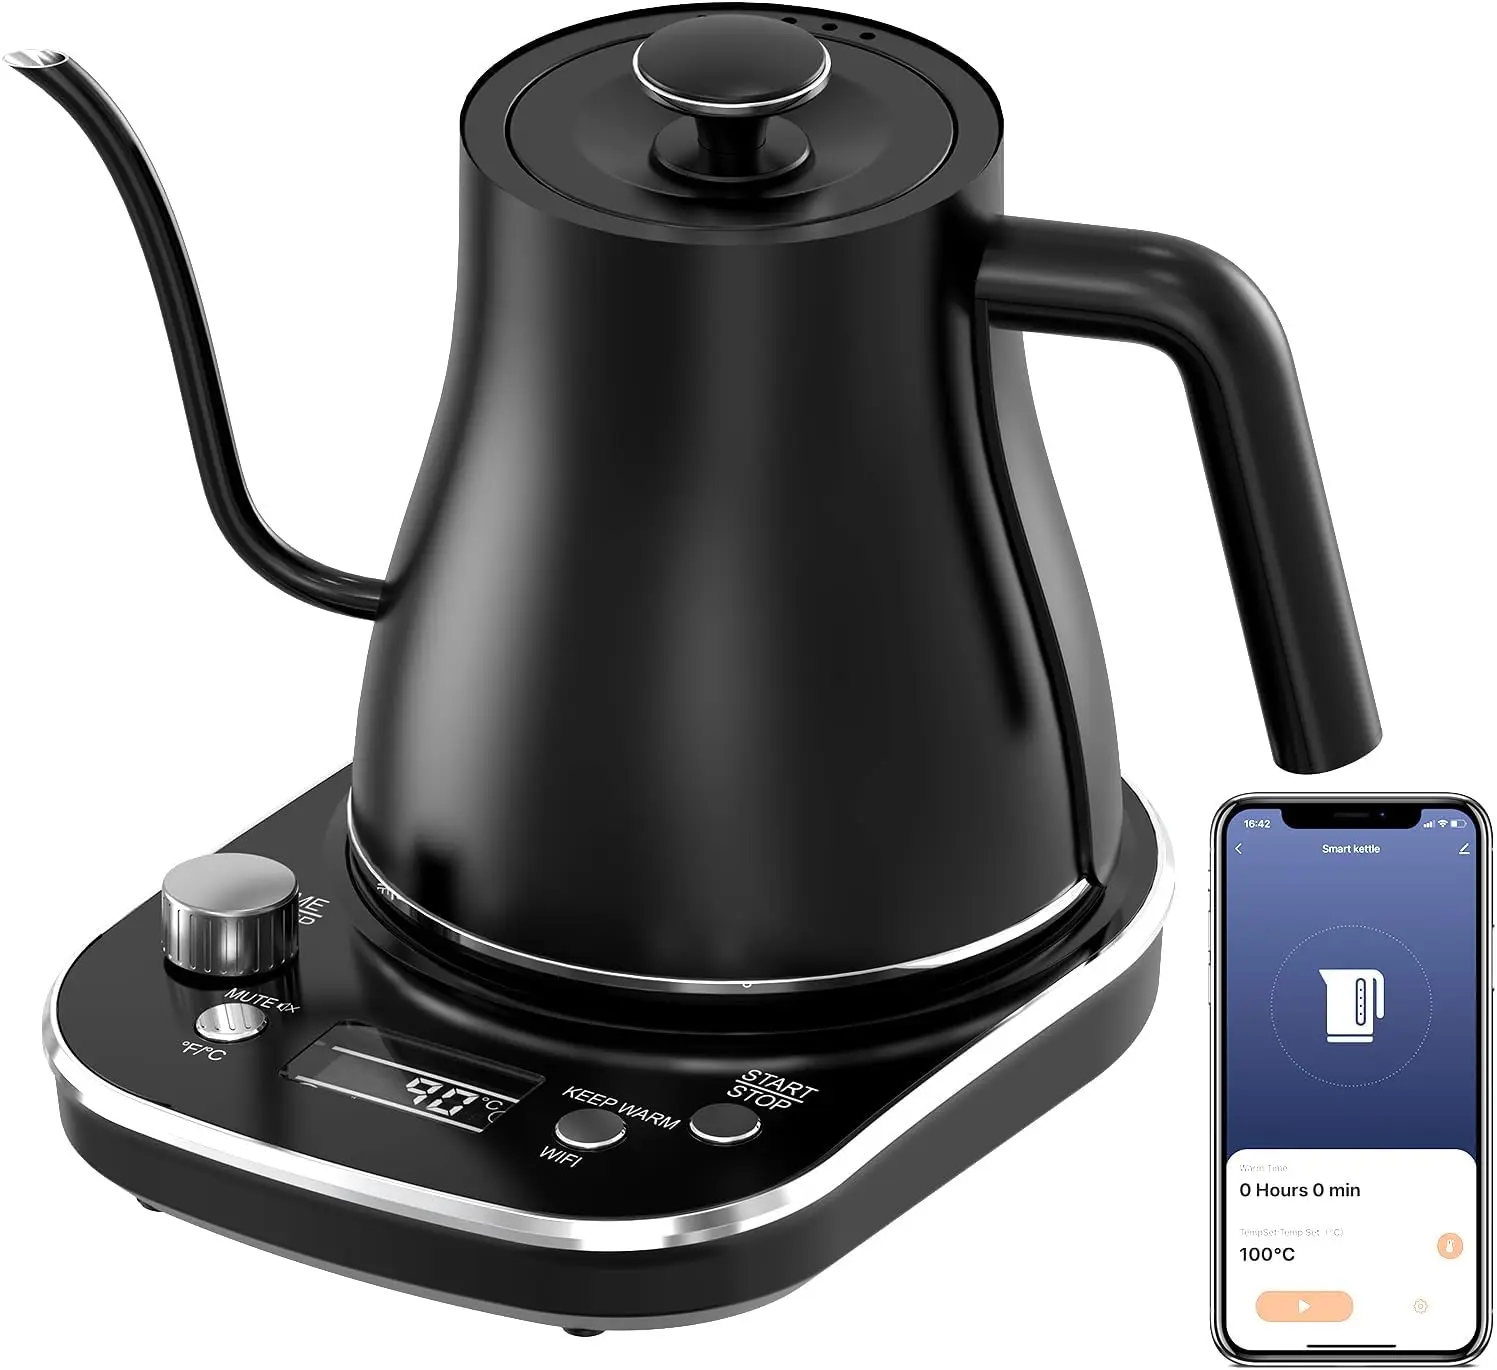 https://ae01.alicdn.com/kf/Sff018c07021942b095de1c49aee8b57el/Kettle-WiFi-Smart-Kettle-Temperature-Control-Pour-Over-Kettle-and-Tea-Kettle-App-Control-1200W-Quick.jpg